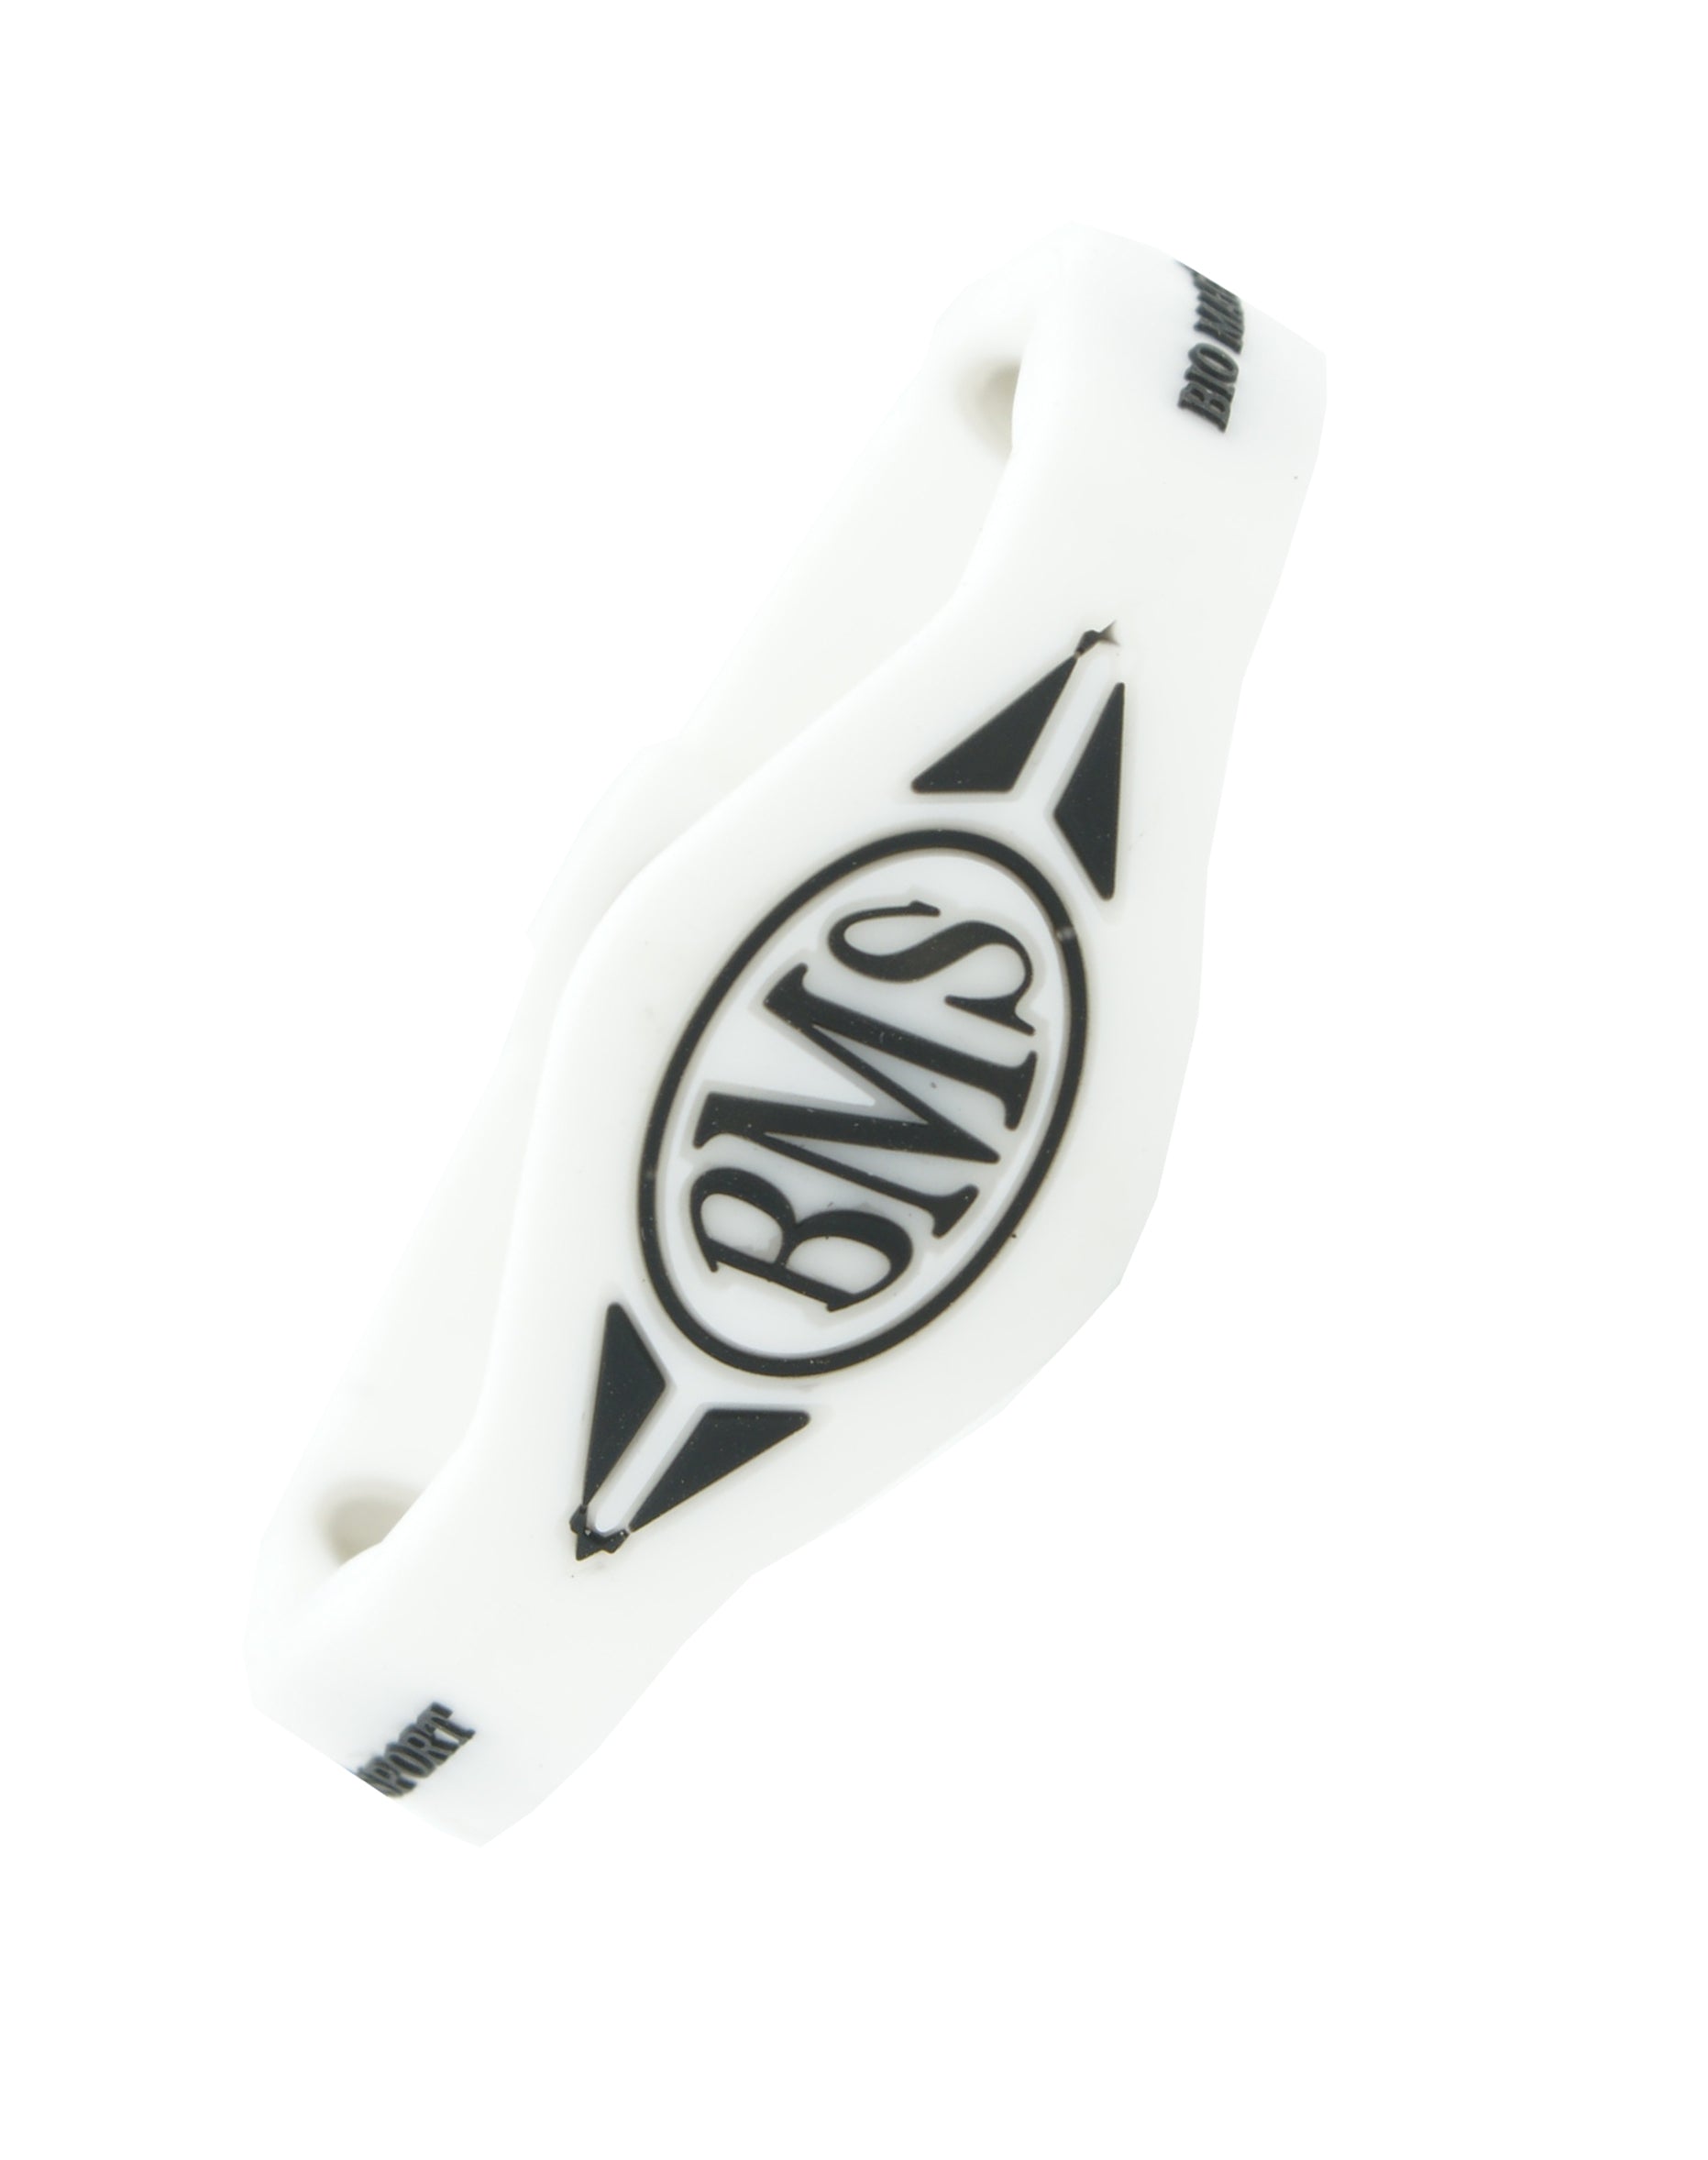 The Bio Magnetic Bracelet in white with a white background. The BMS symbol is very visible and stark black against the white background. 